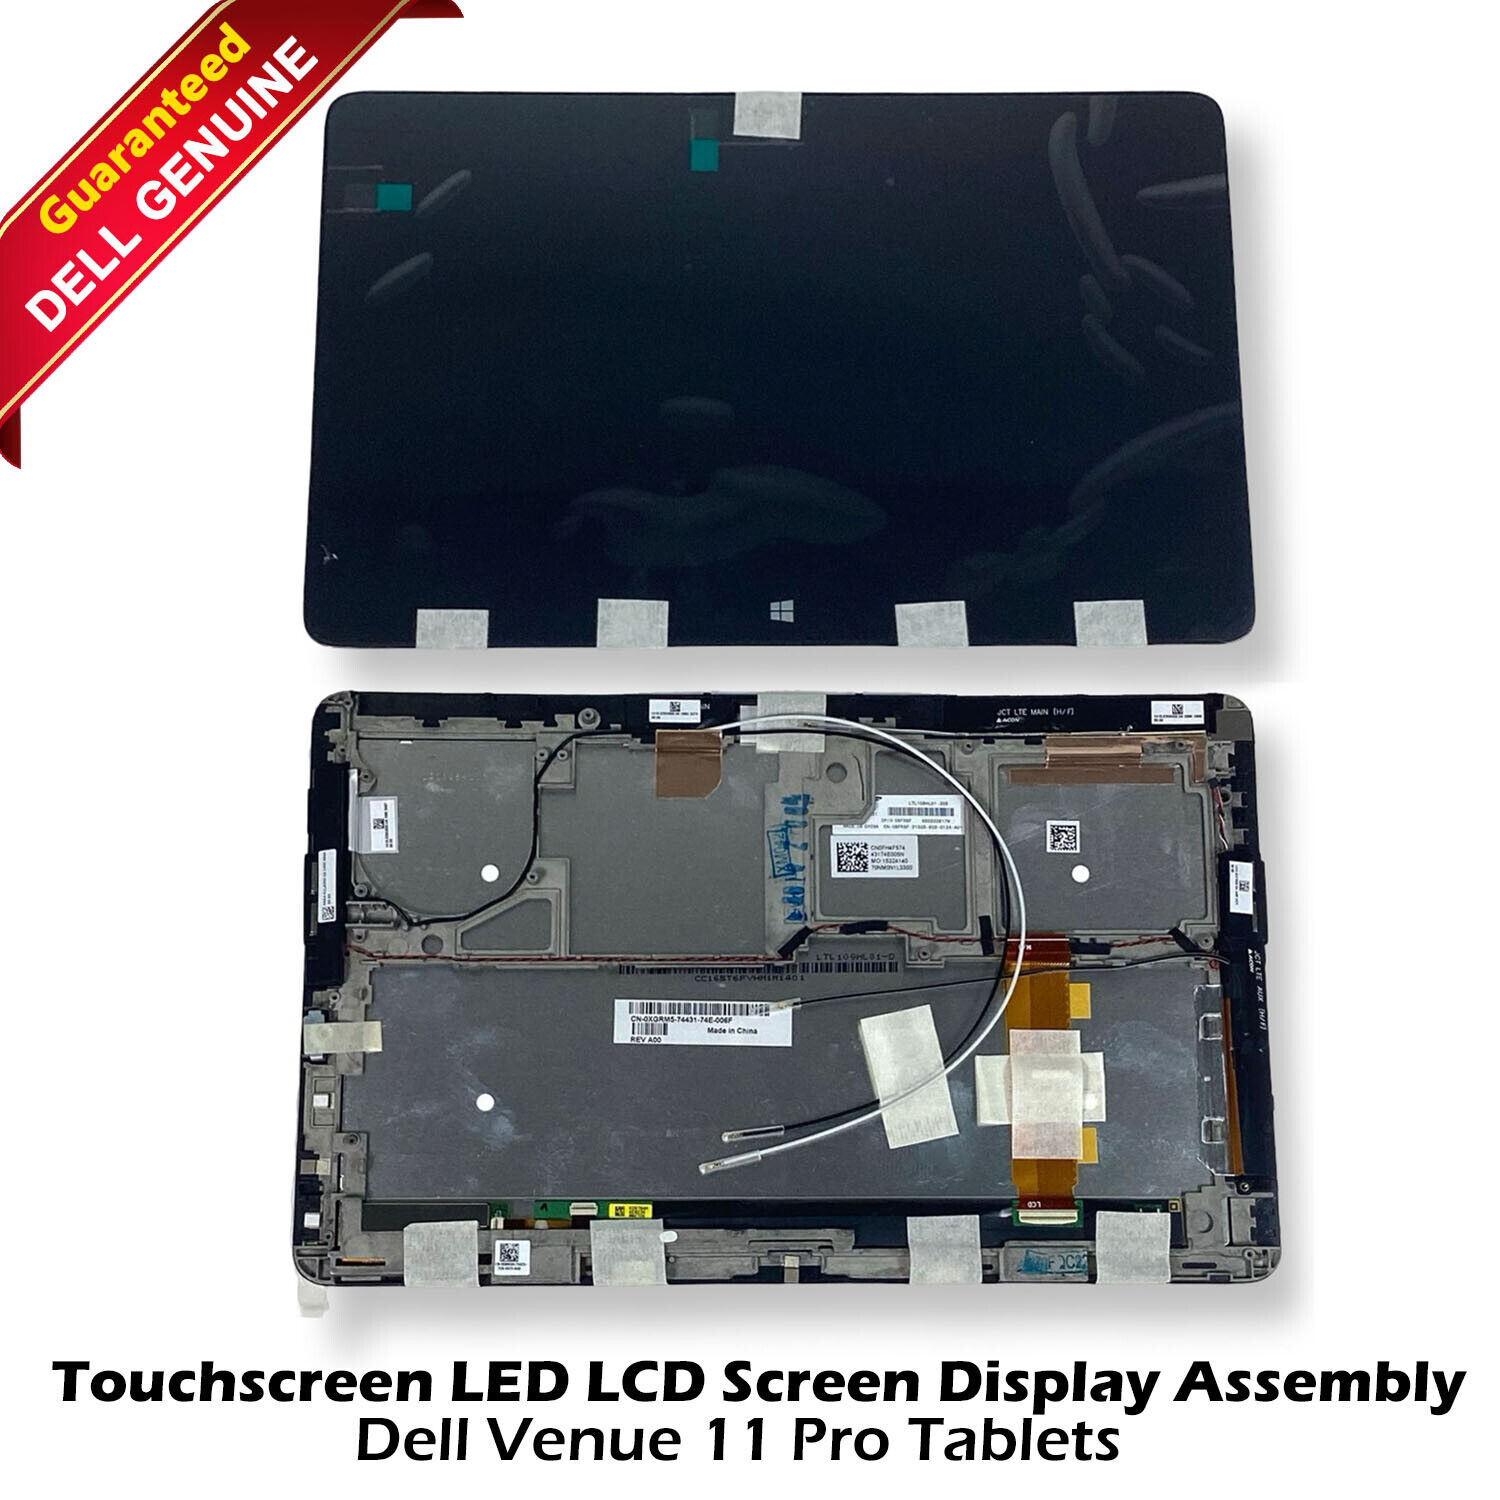 Lot x 3 New Dell Venue 11 Pro 7130 7139 Tablet Touch LCD Screen Display XGRM5